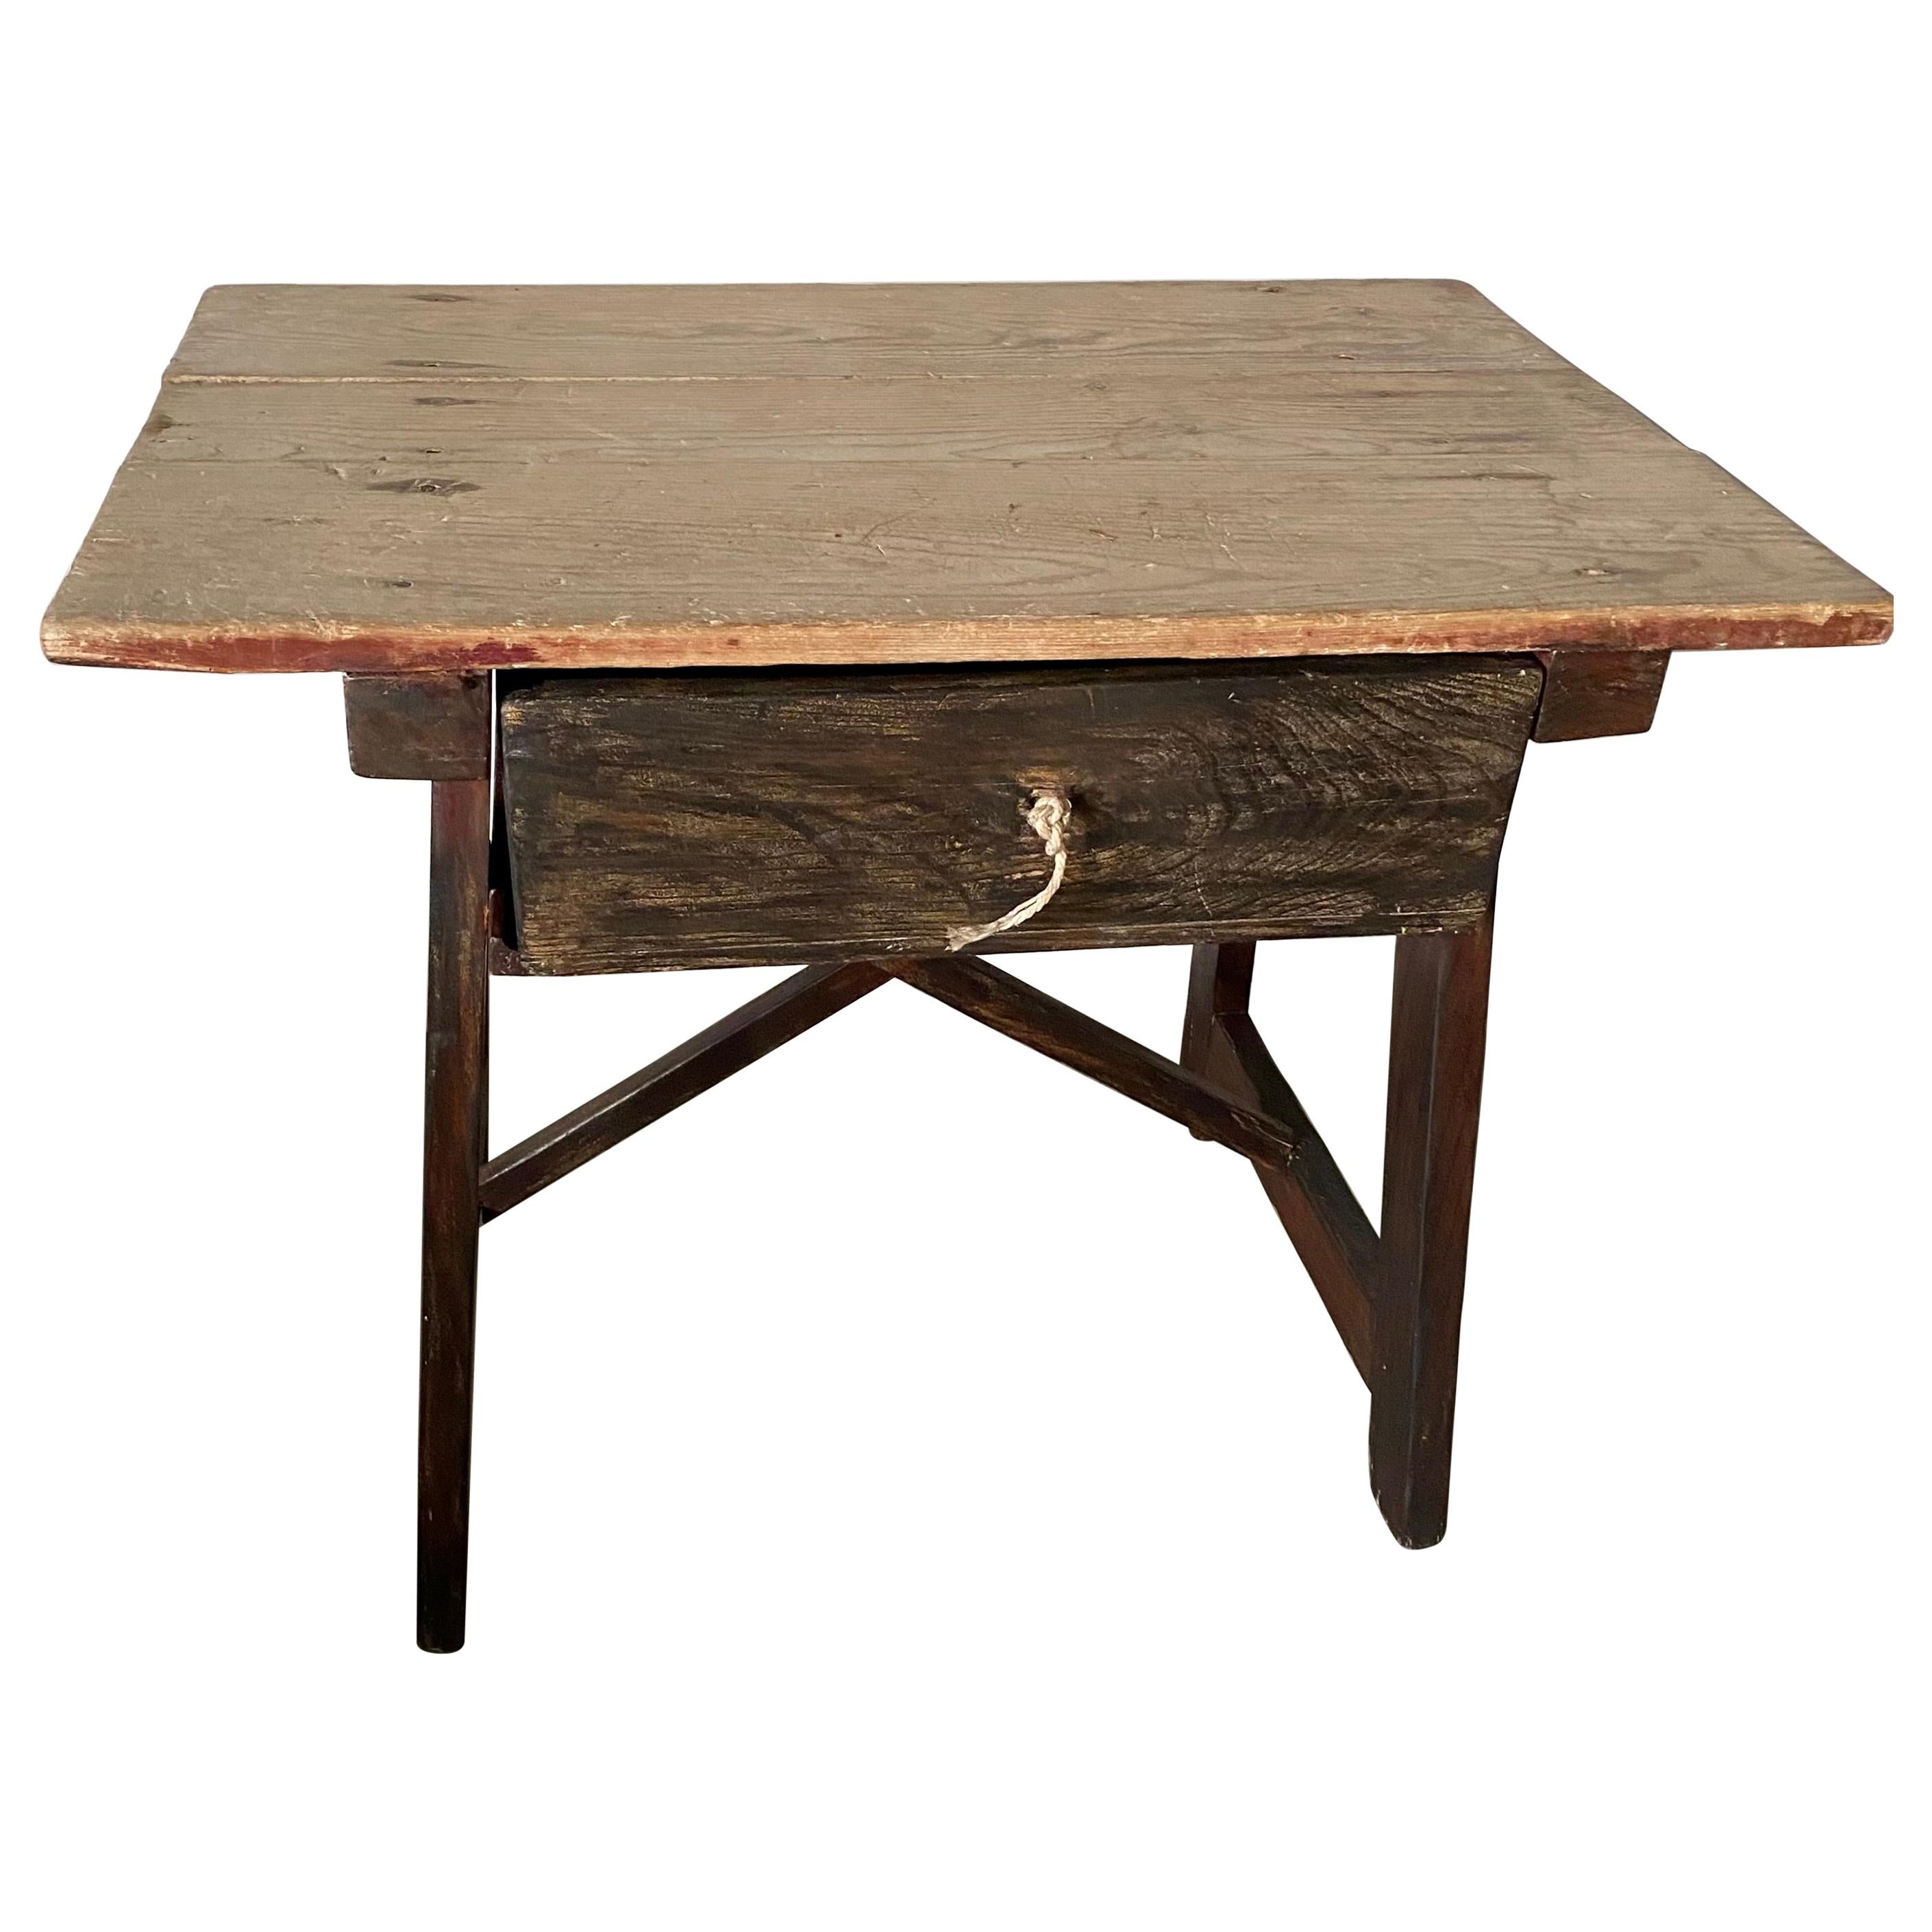 19th Century Rustic Country Work Table